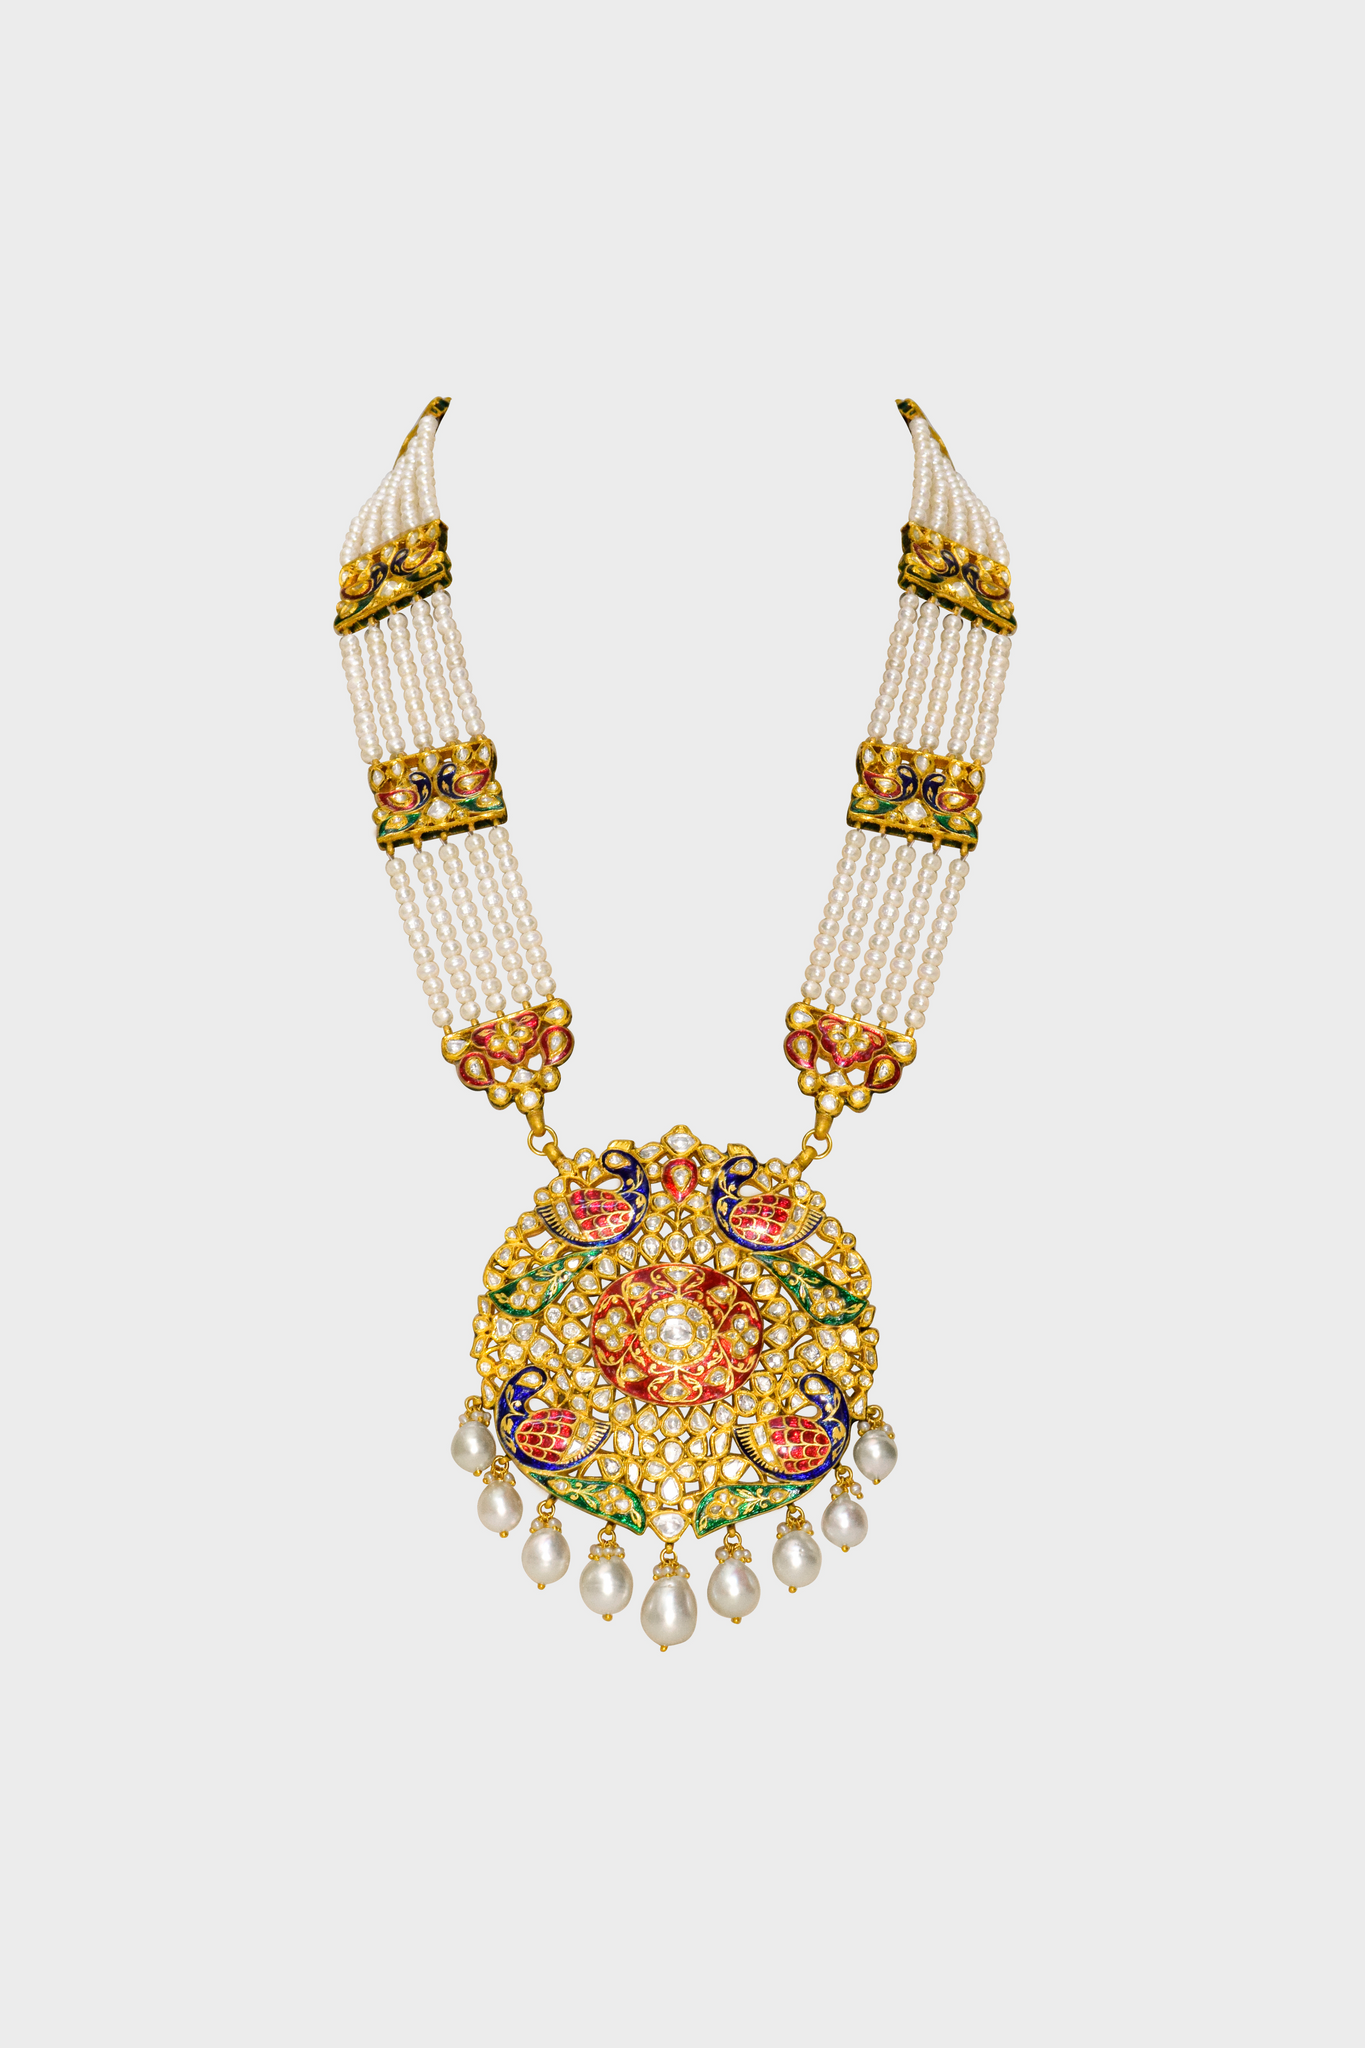 Long necklace adorned with stunning peacock Meena design